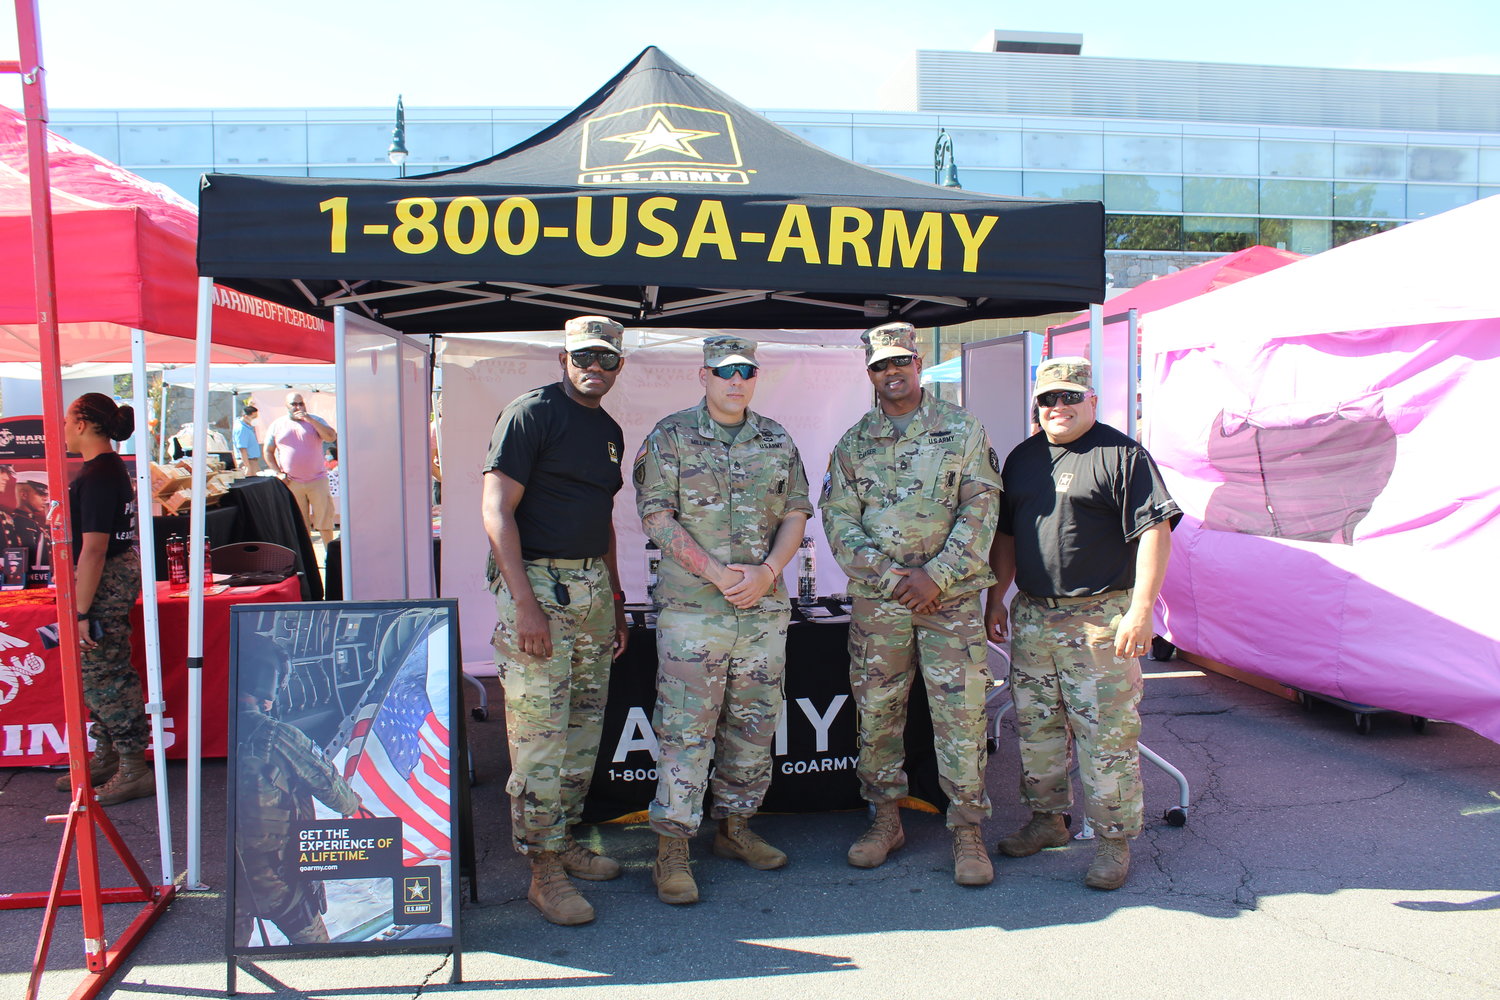 U.S. service members stood at their recruitment booth.